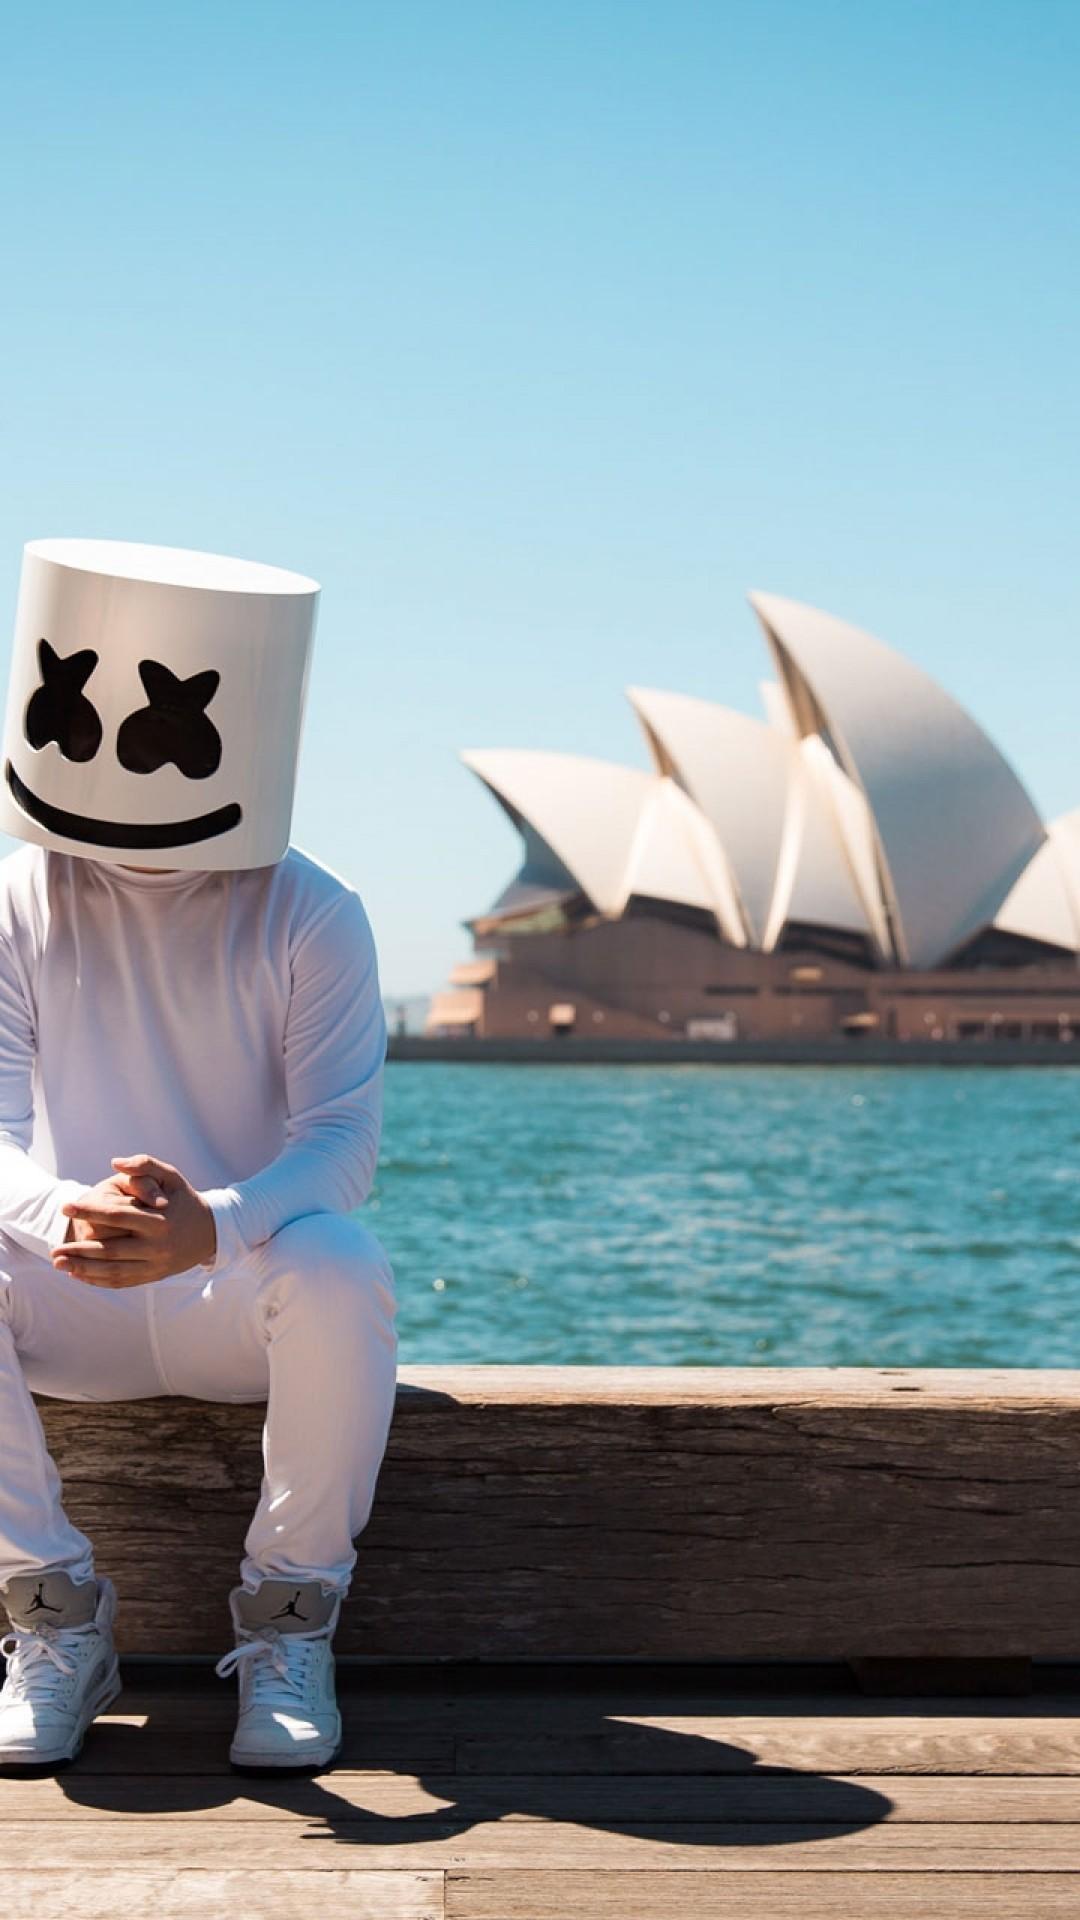 Cool Marshmello Wallpapers - Top 12 Best Cool Marshmello Wallpapers [ HQ ]